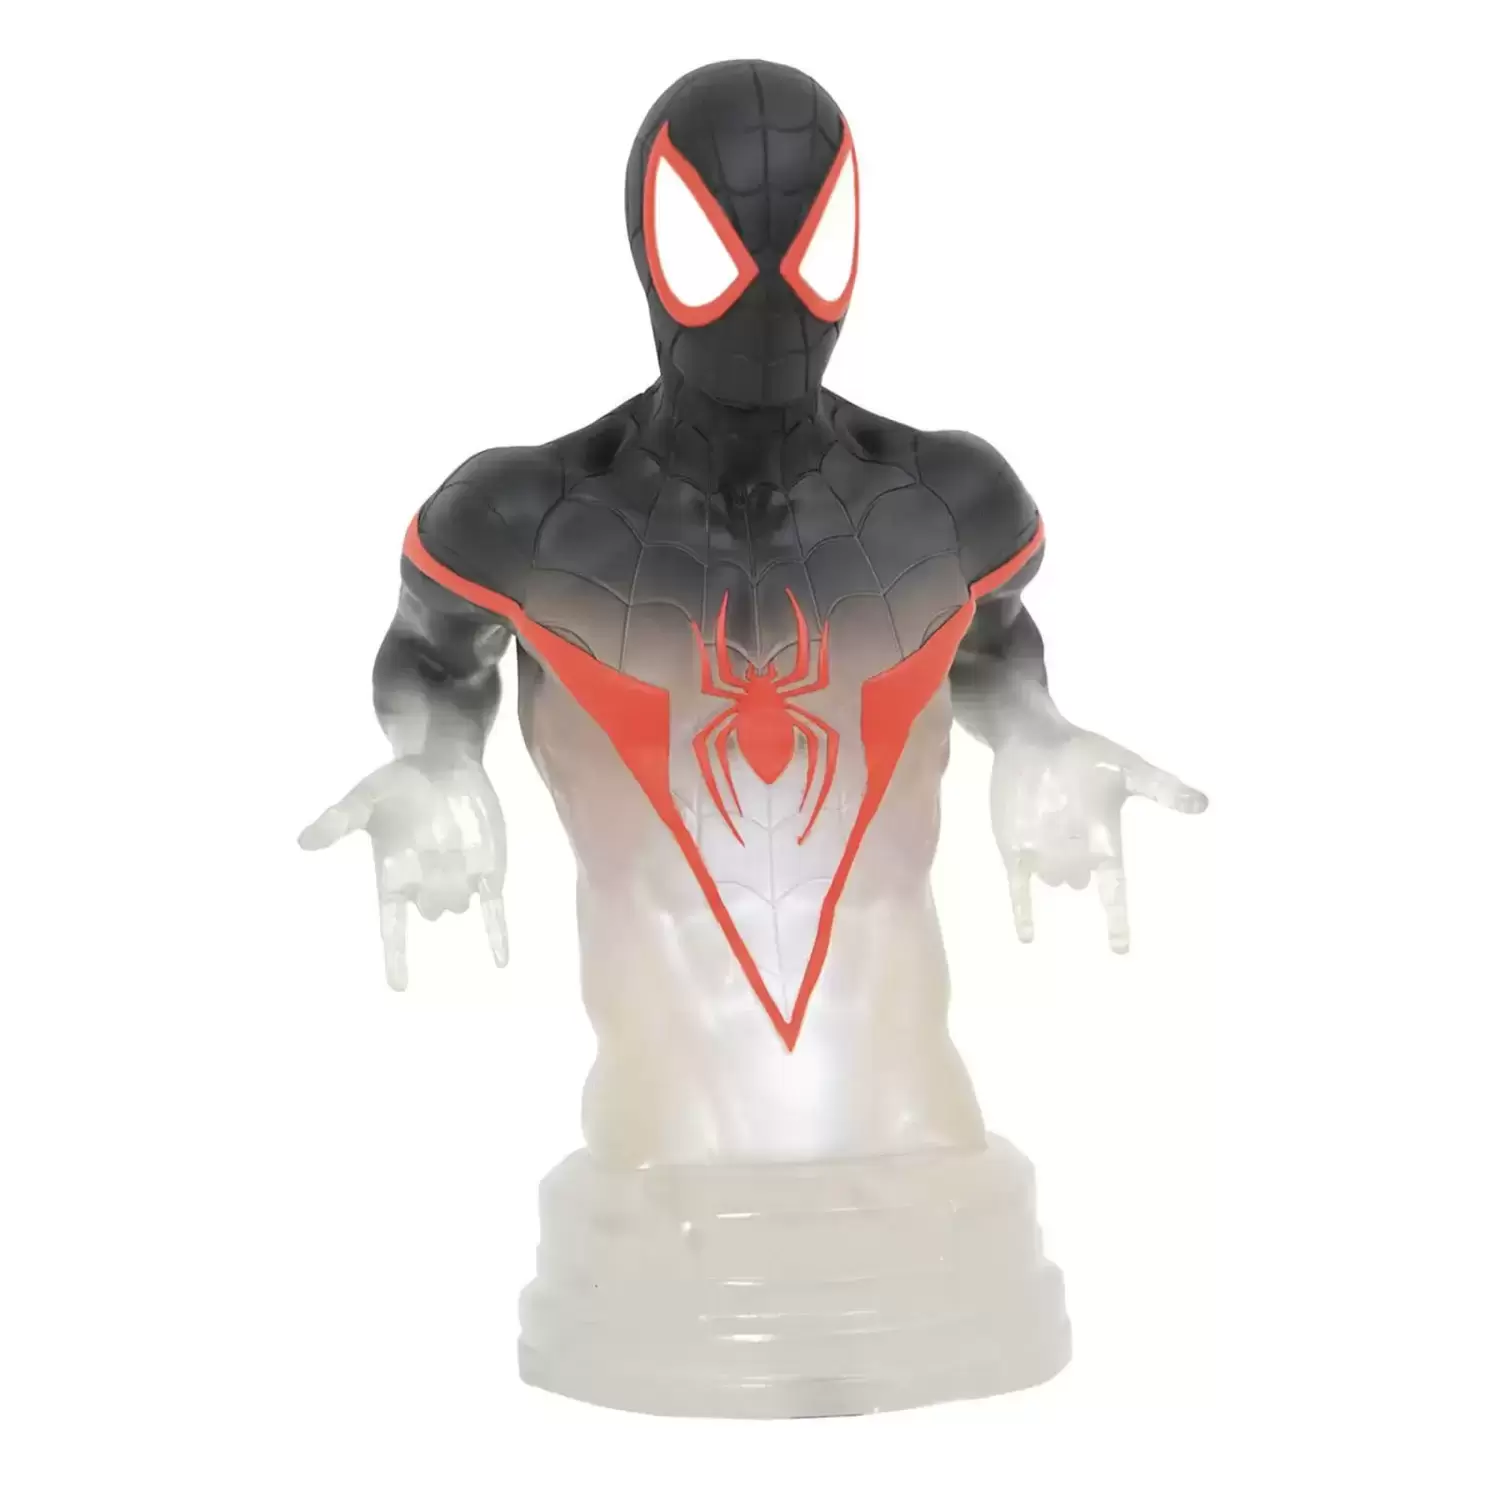 Marvel Select Miles Morales Spider-Man Action Figure (with Spider-Ham)